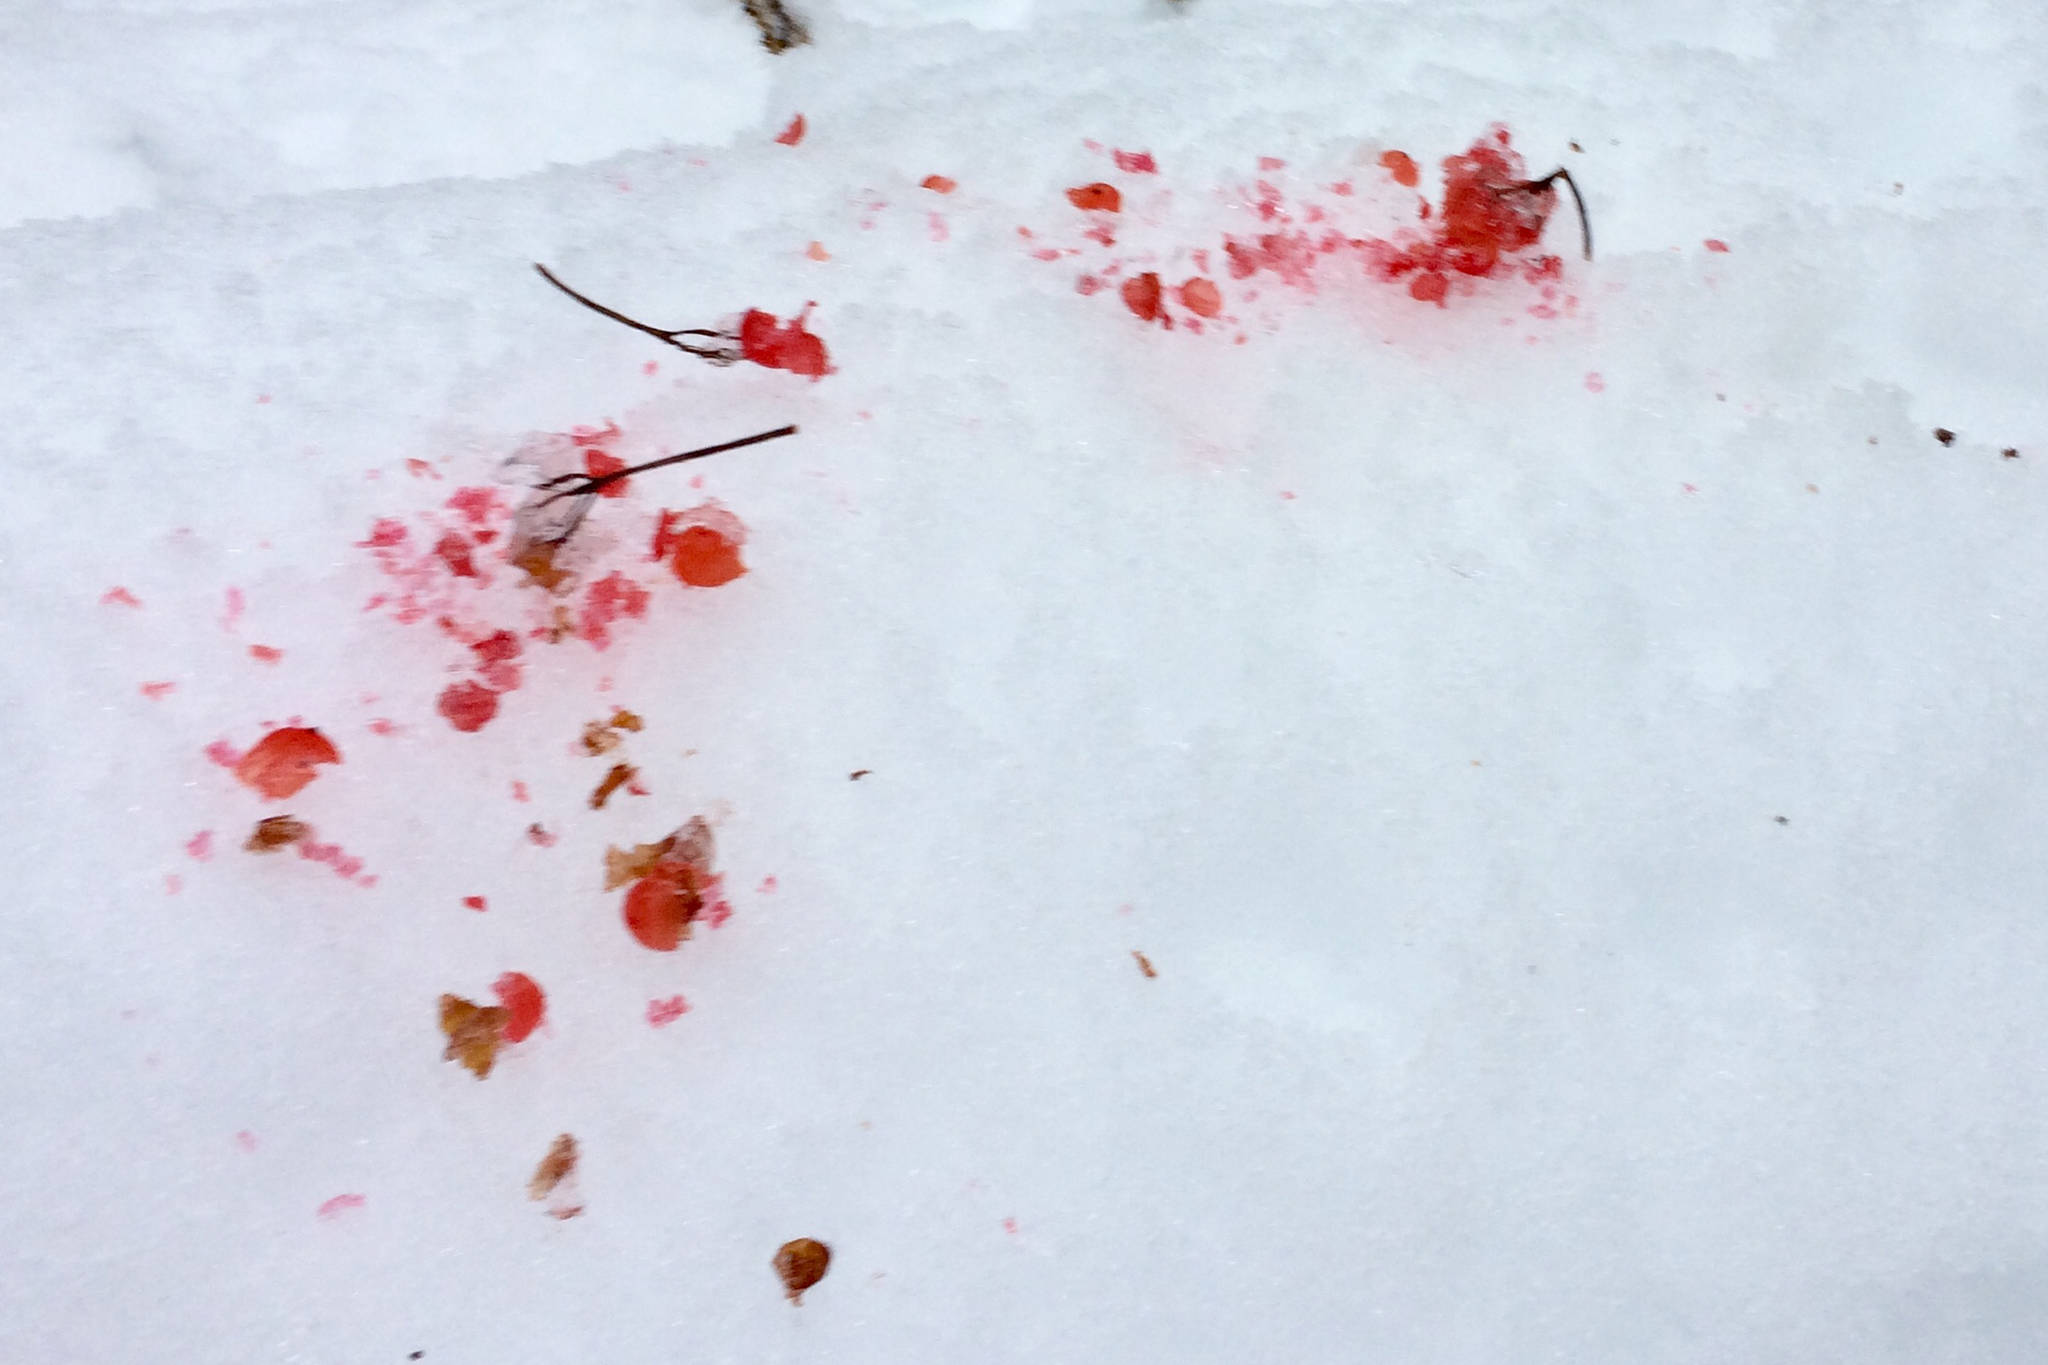 Seeing Red: Highbush cranberries in the snow